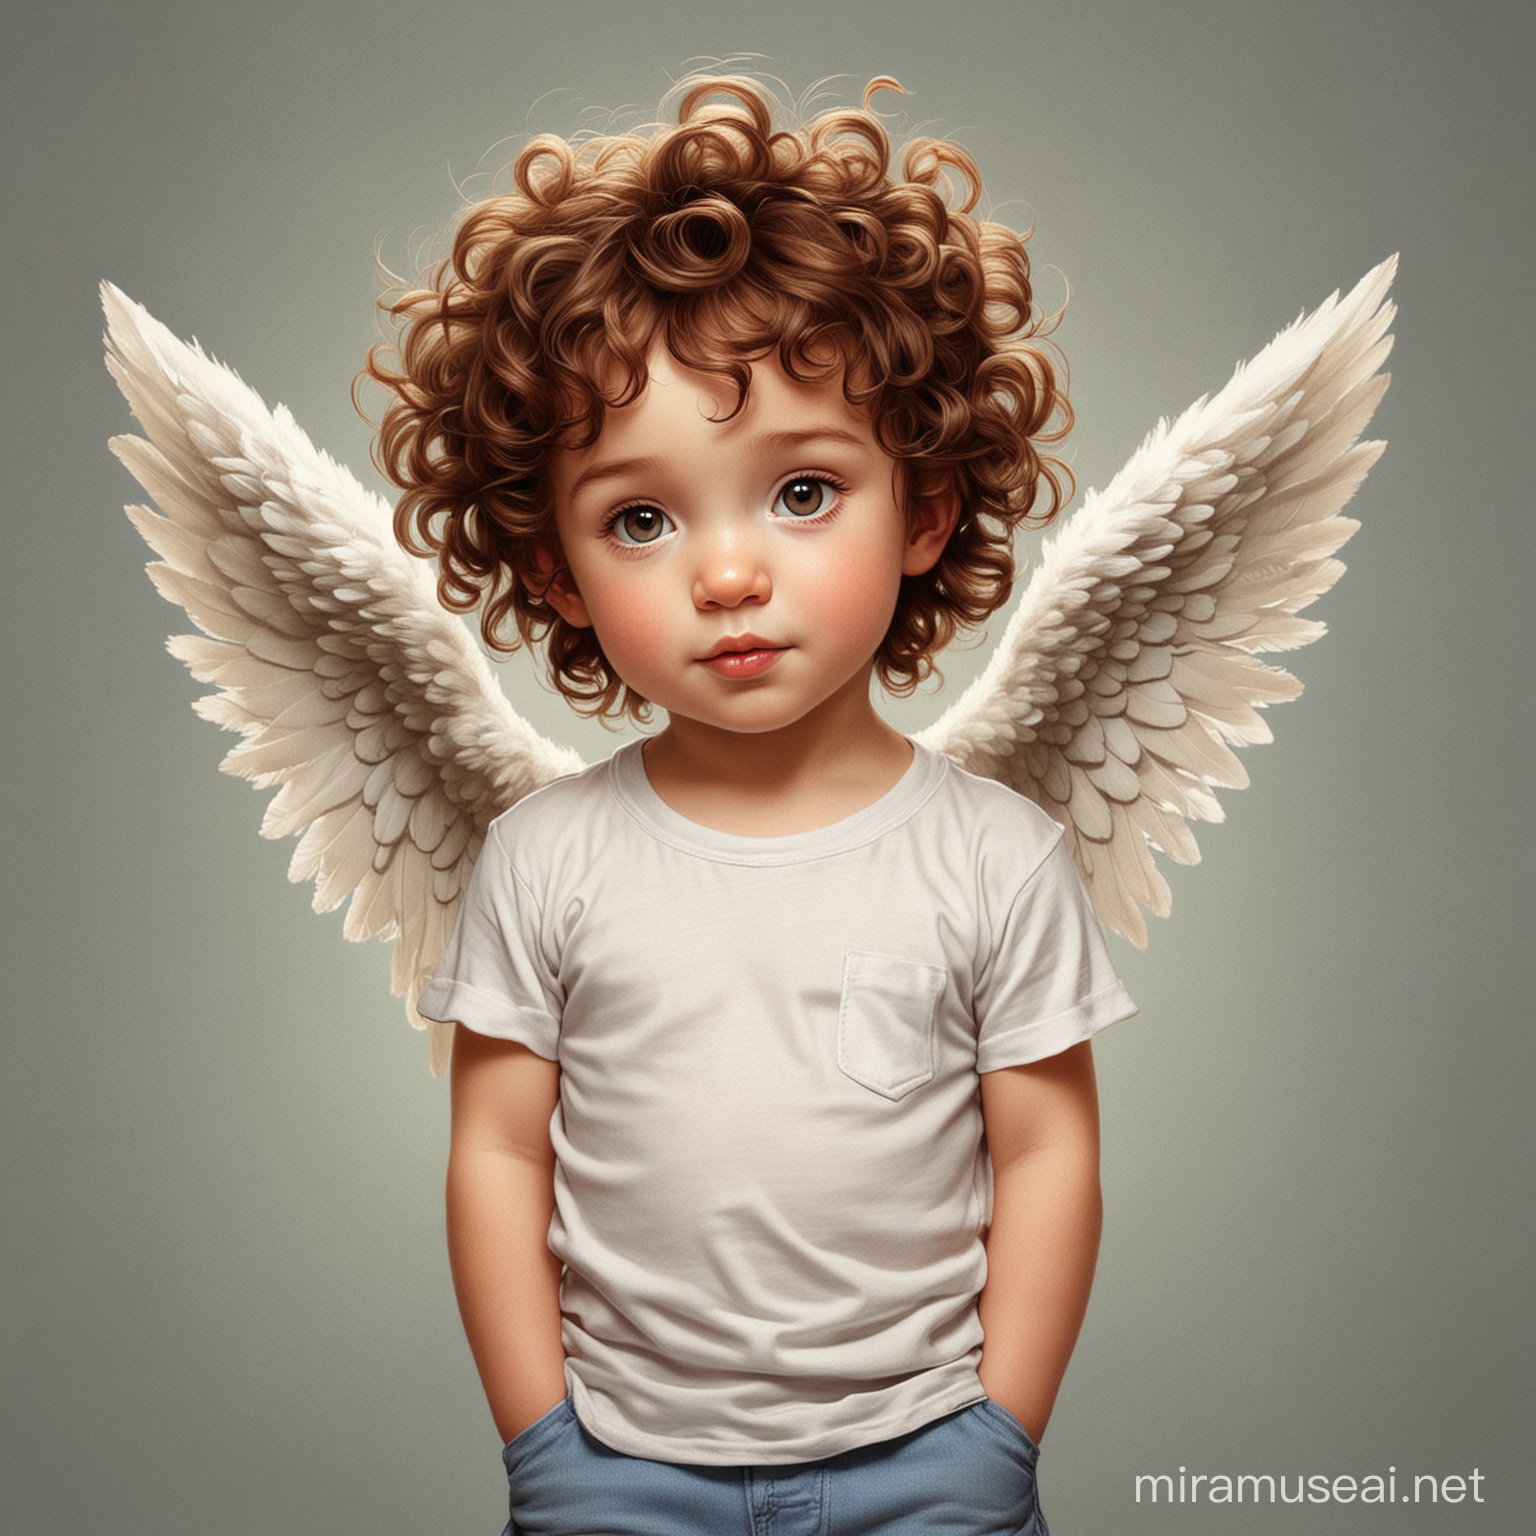 I would like a cherub with brown curly hair wearing a tee shirt